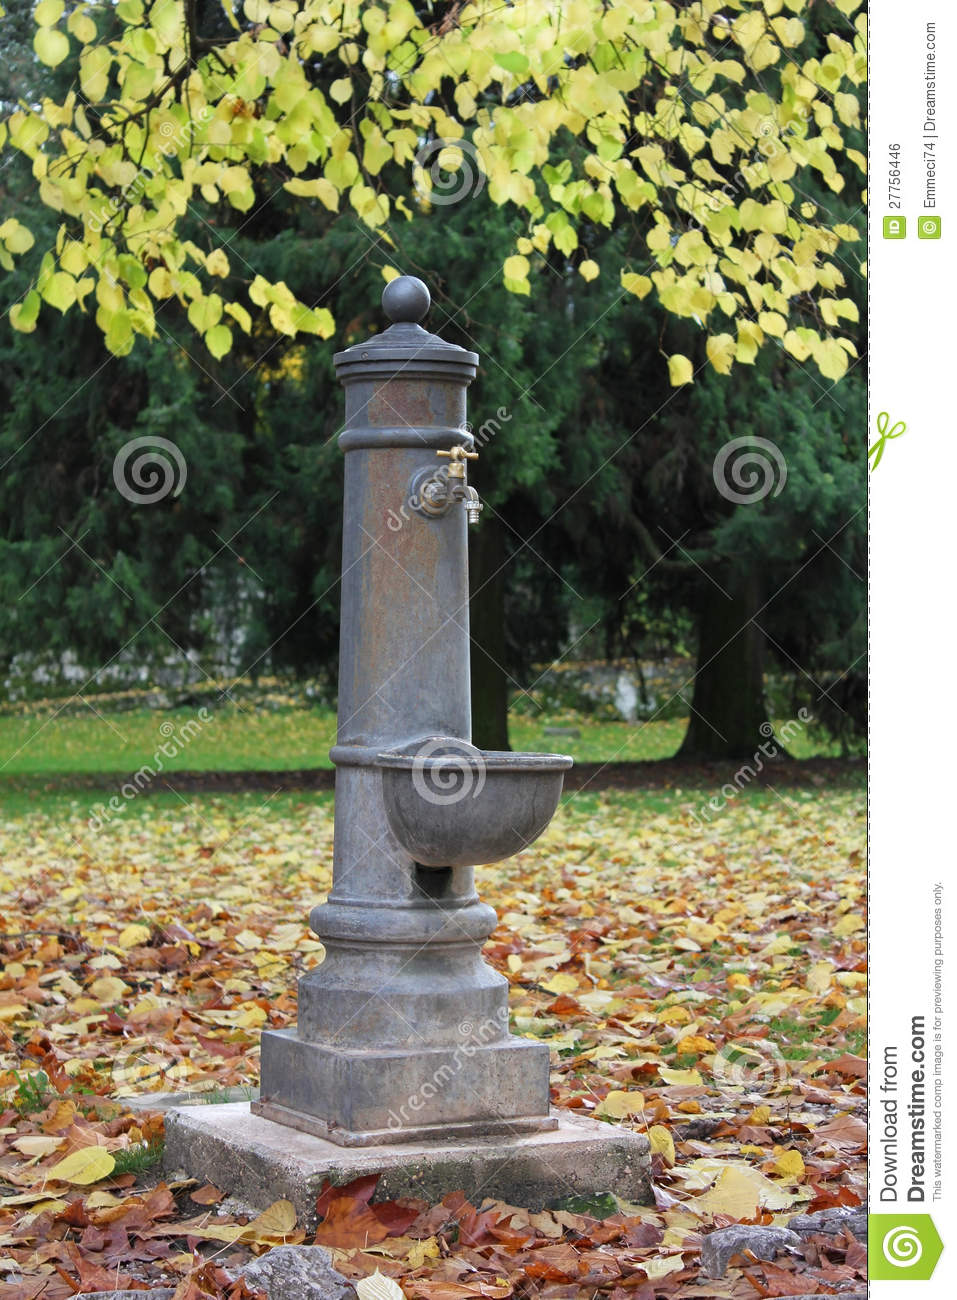 Drinking Fountain In The Park Royalty Free Stock Image   Image